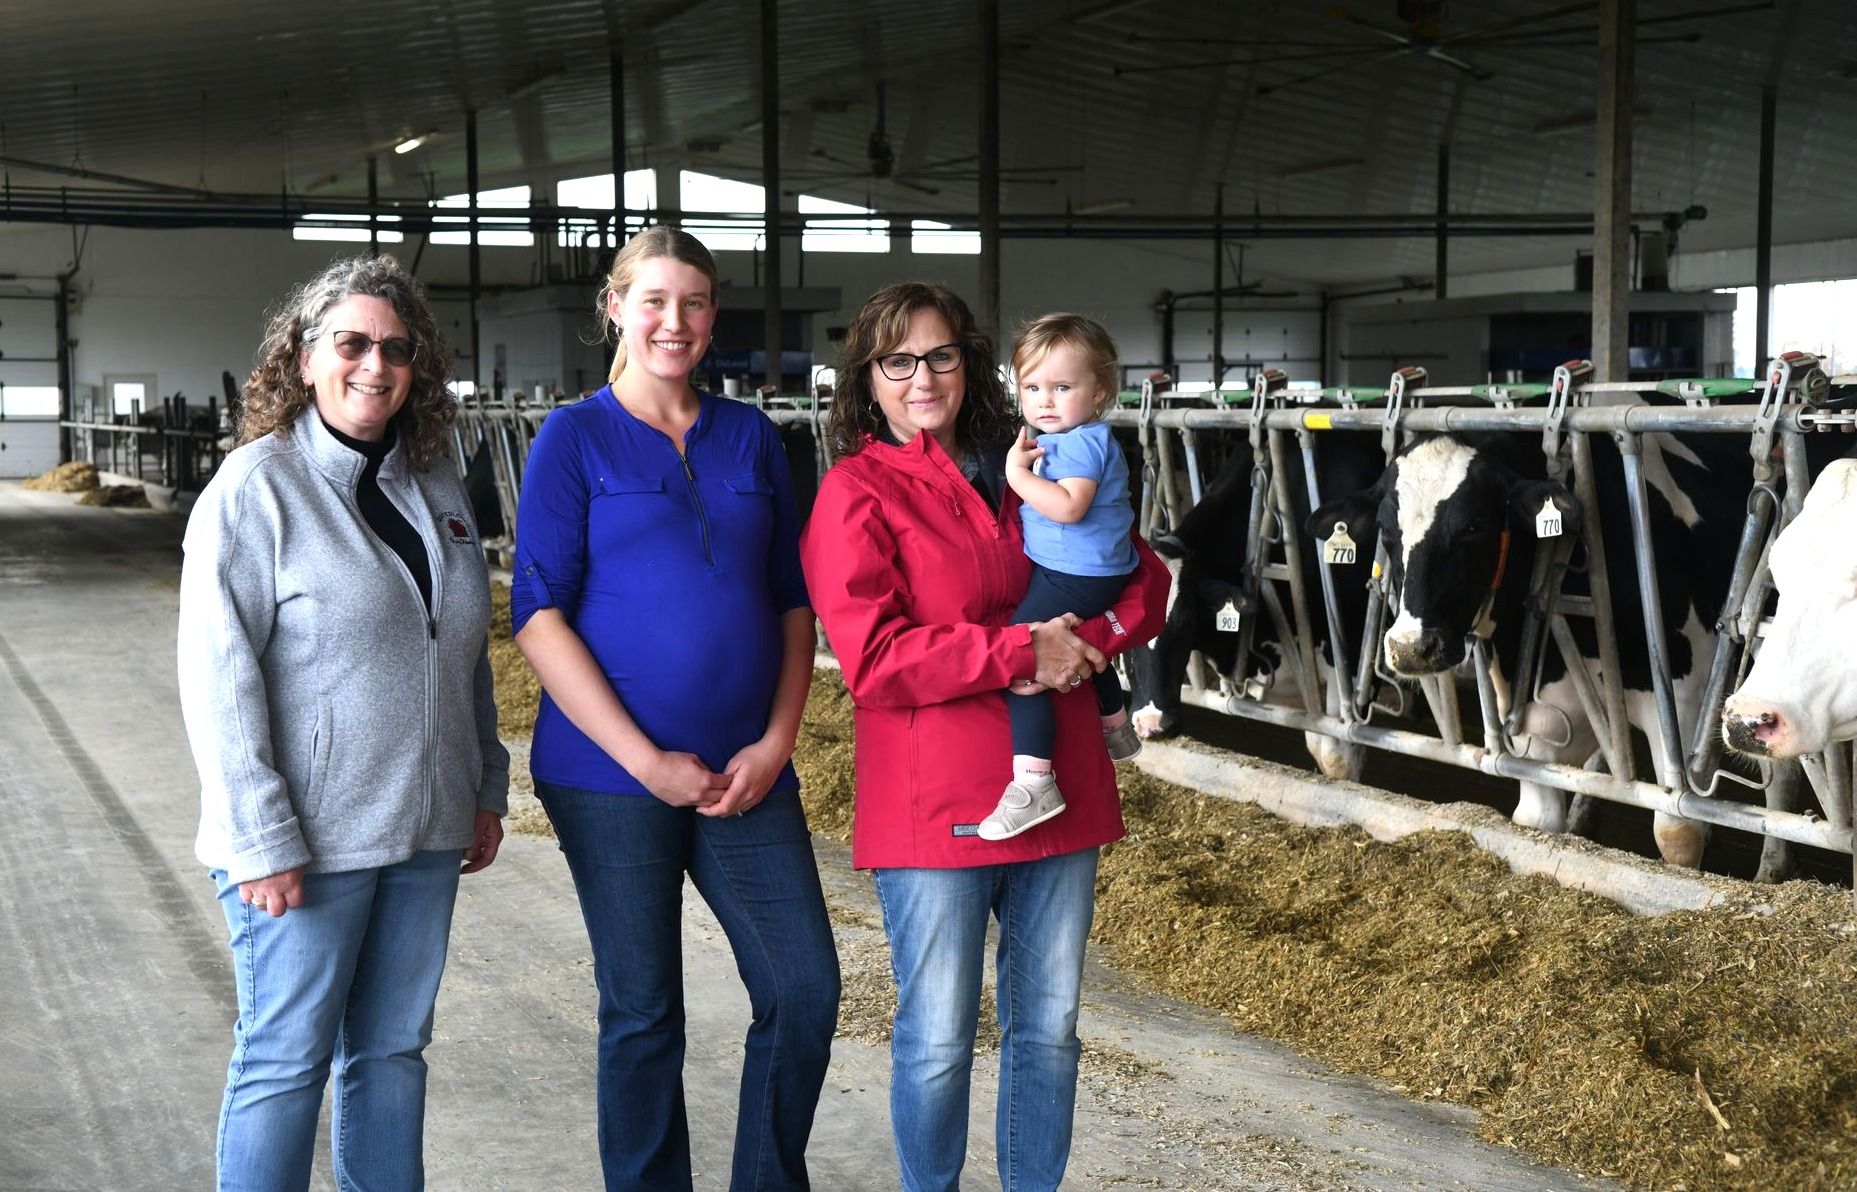 Women make major contributions to ag. sector